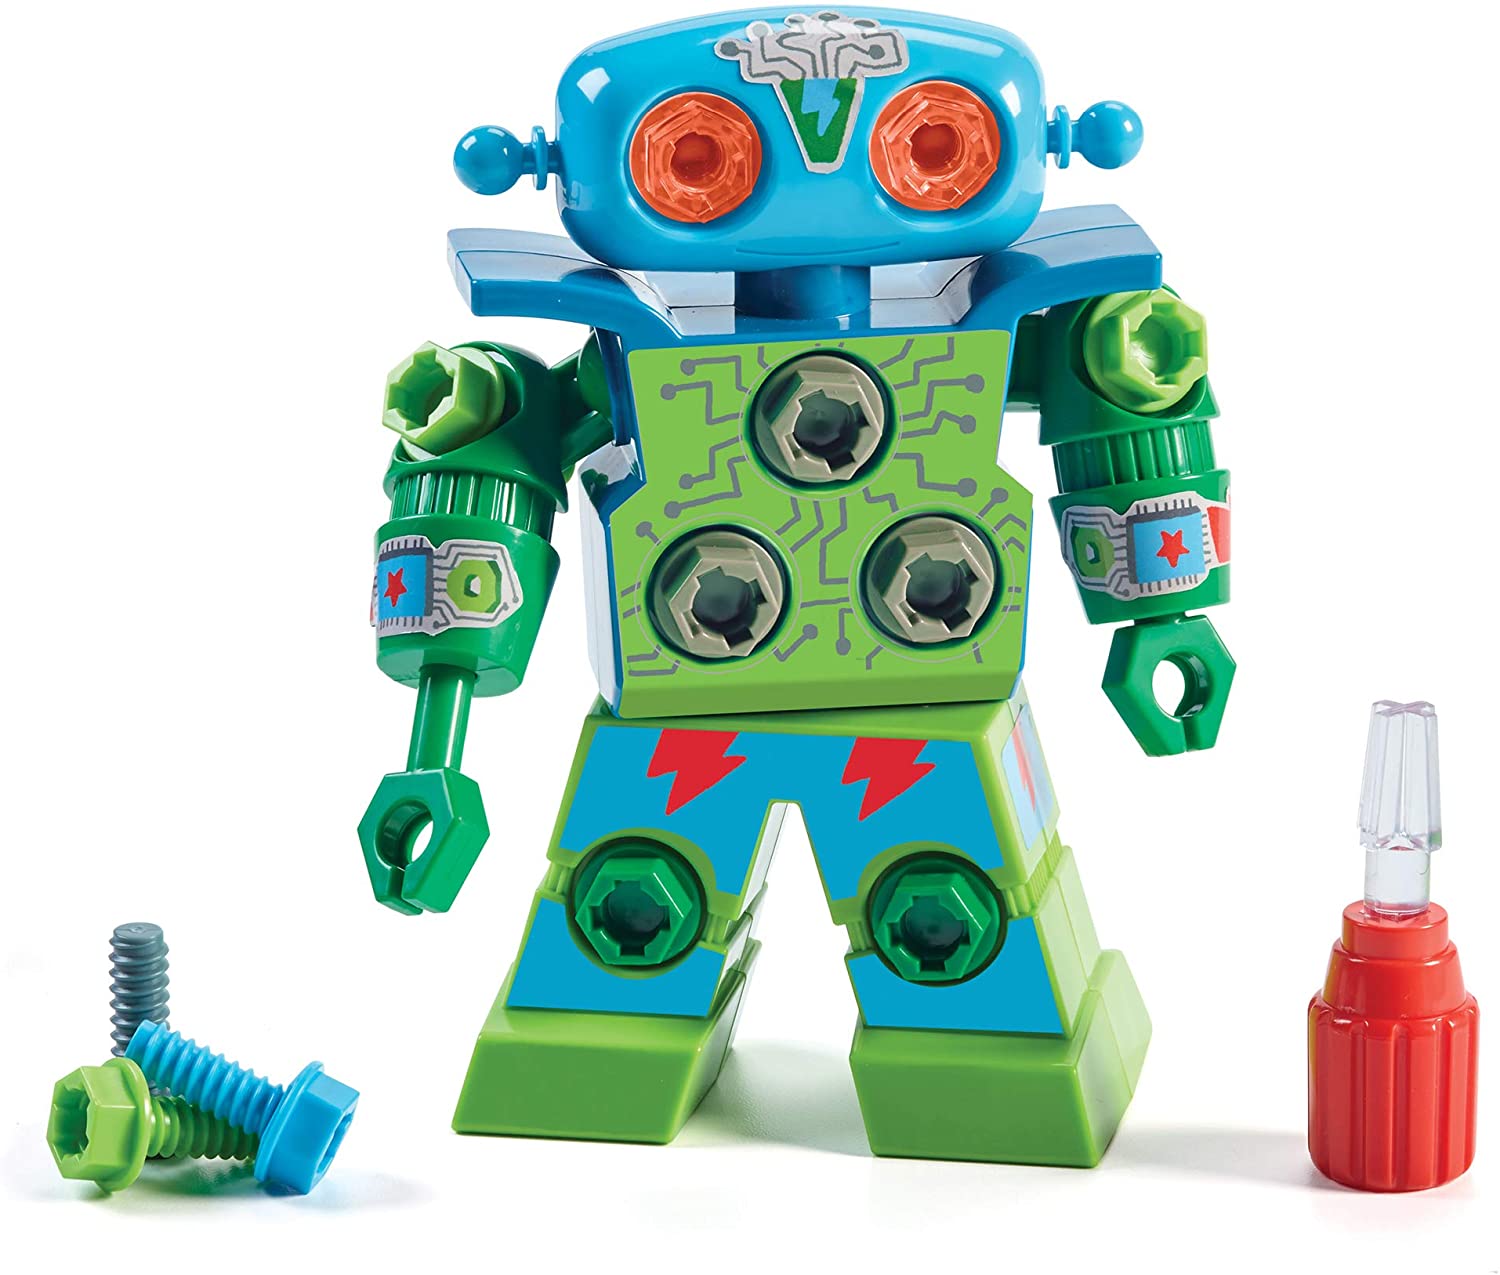 Review of Educational Insights Design & Drill Robot Toy, 23 Piece Set